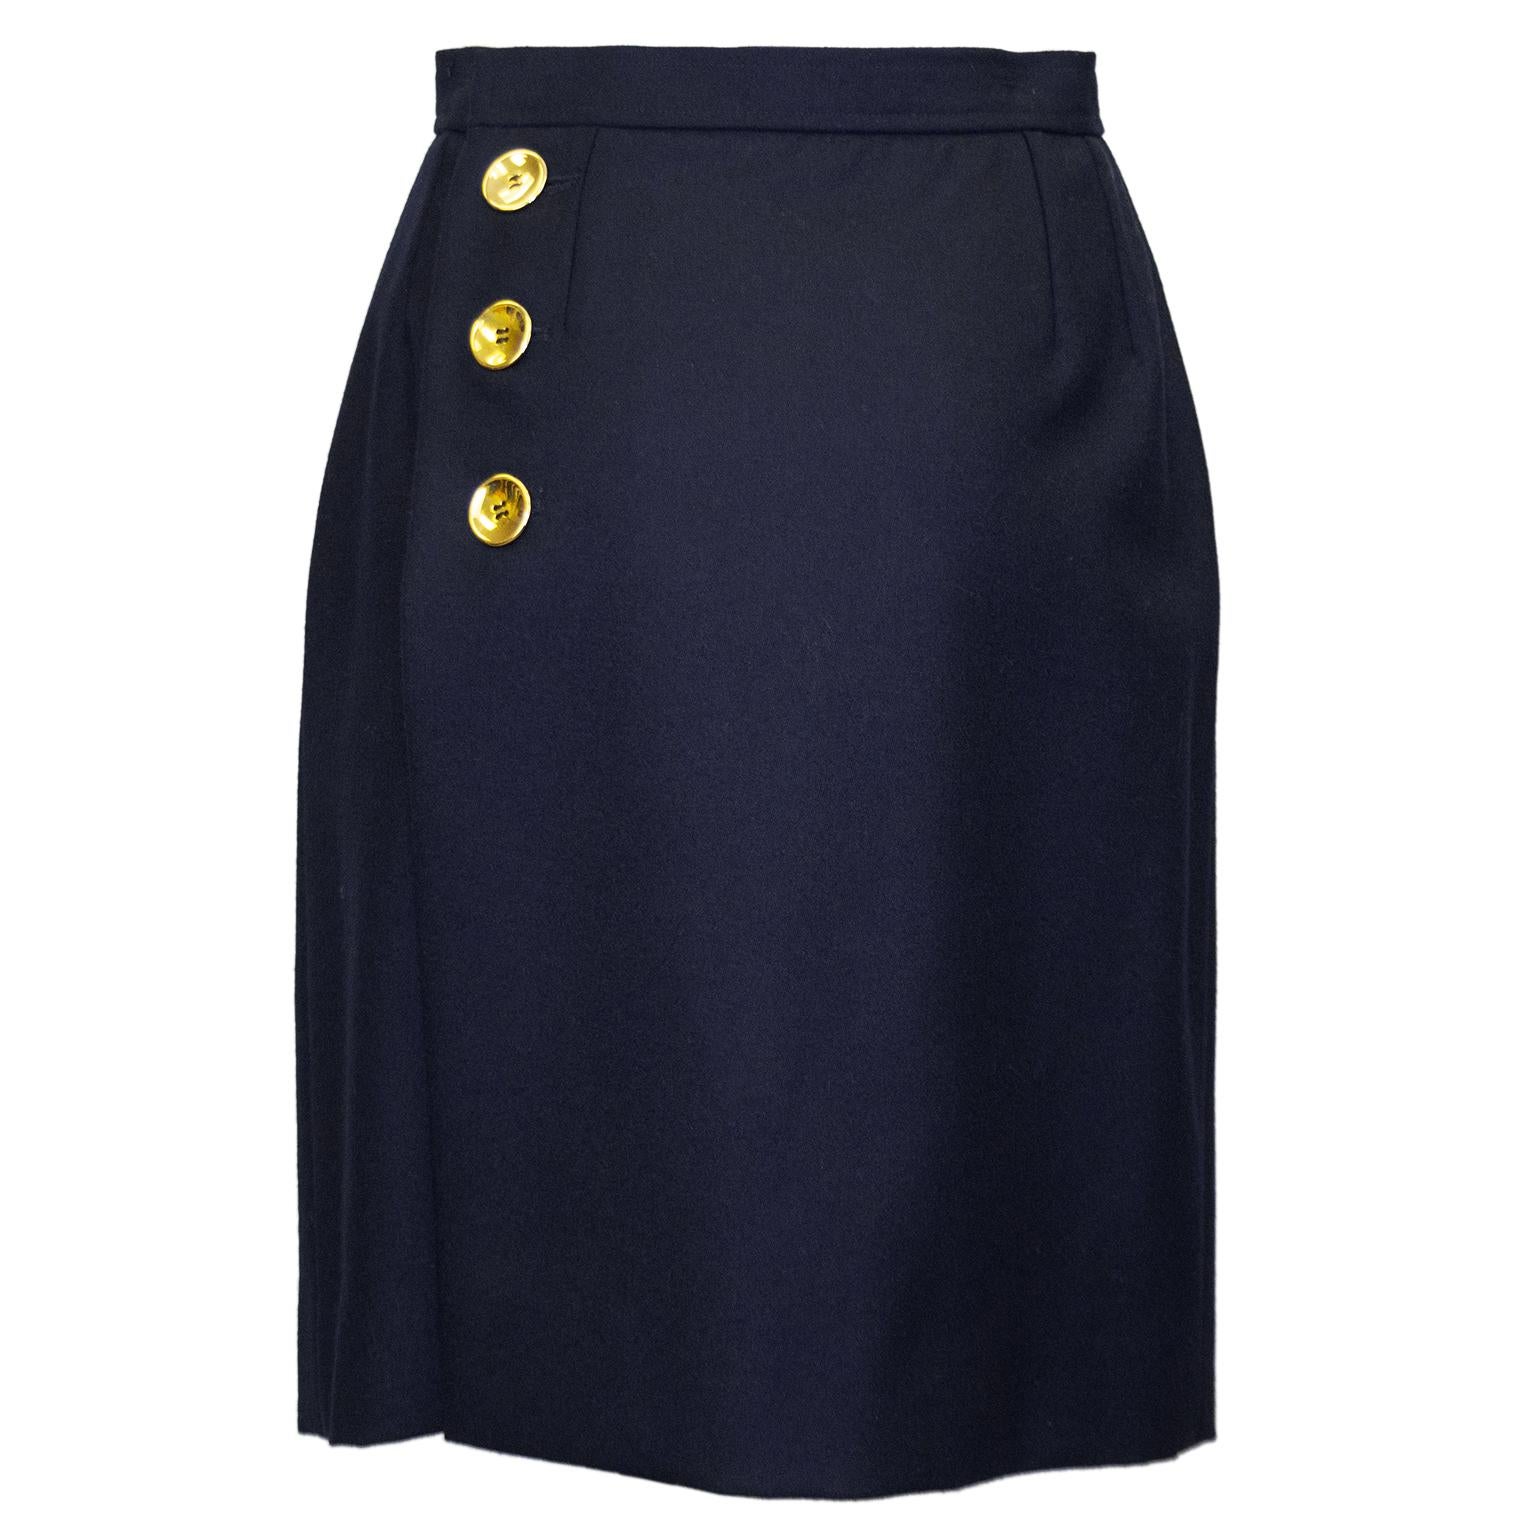 Early 1990s Saint Laurent Navy Wool Skirt Suit with Gold Buttons In Good Condition For Sale In Toronto, Ontario